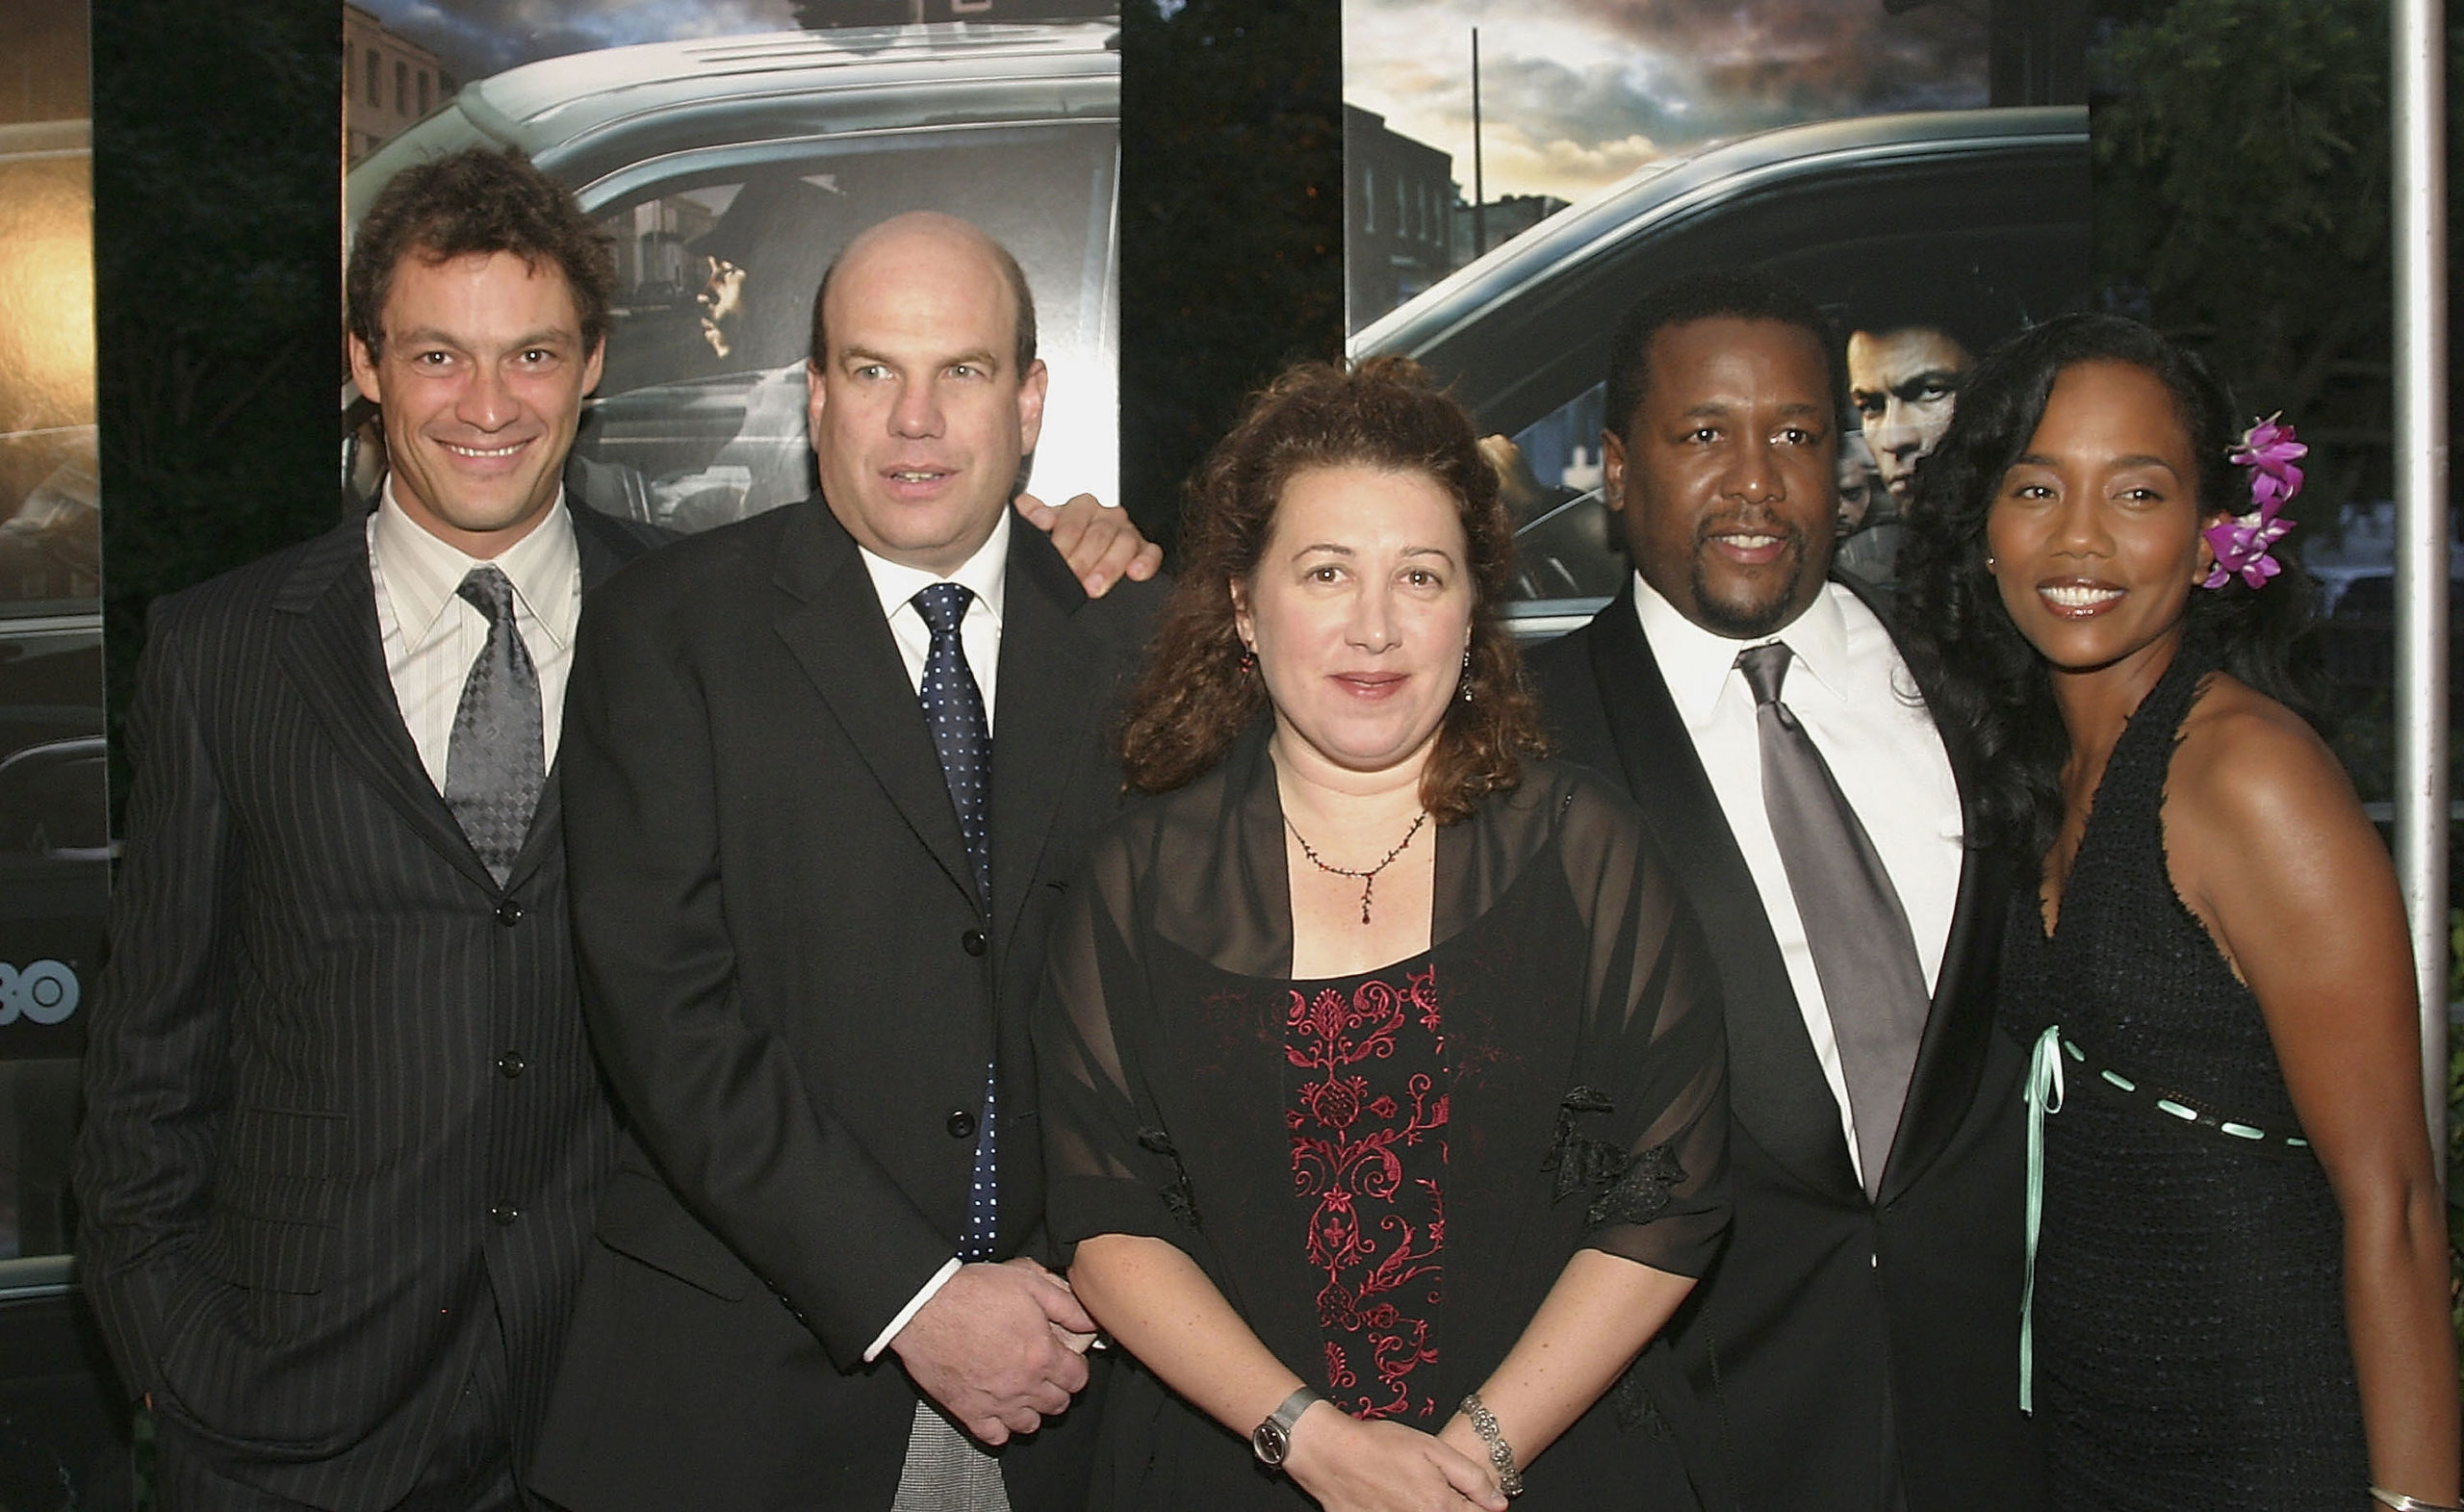 Premiere Of “The Wire” – Arrivals